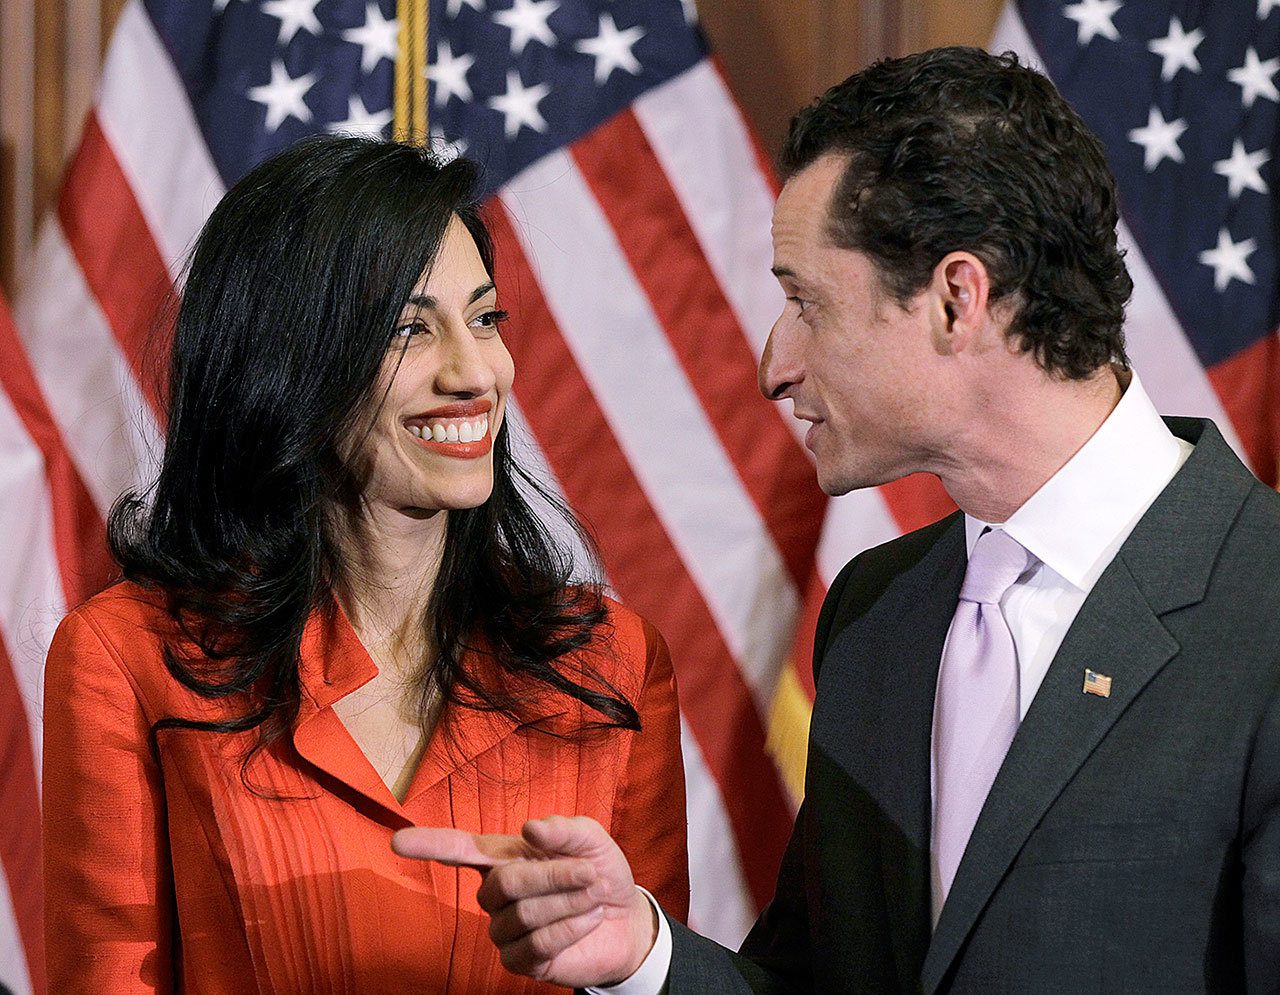 In this photo taken Jan. 5, 2011, then-New York Rep. Anthony Weiner and his wife, Huma Abedin, an aide to then-Secretary of State Hillary Clinton, are pictured after a ceremonial swearing in of the 112th Congress on Capitol Hill in Washington. Democratic presidential candidate Hillary Clinton aide Huma Abedin says she is separating from husband Anthony Weiner after another sexting revelation involving the former congressman from New York. (AP Photo/Charles Dharapak)